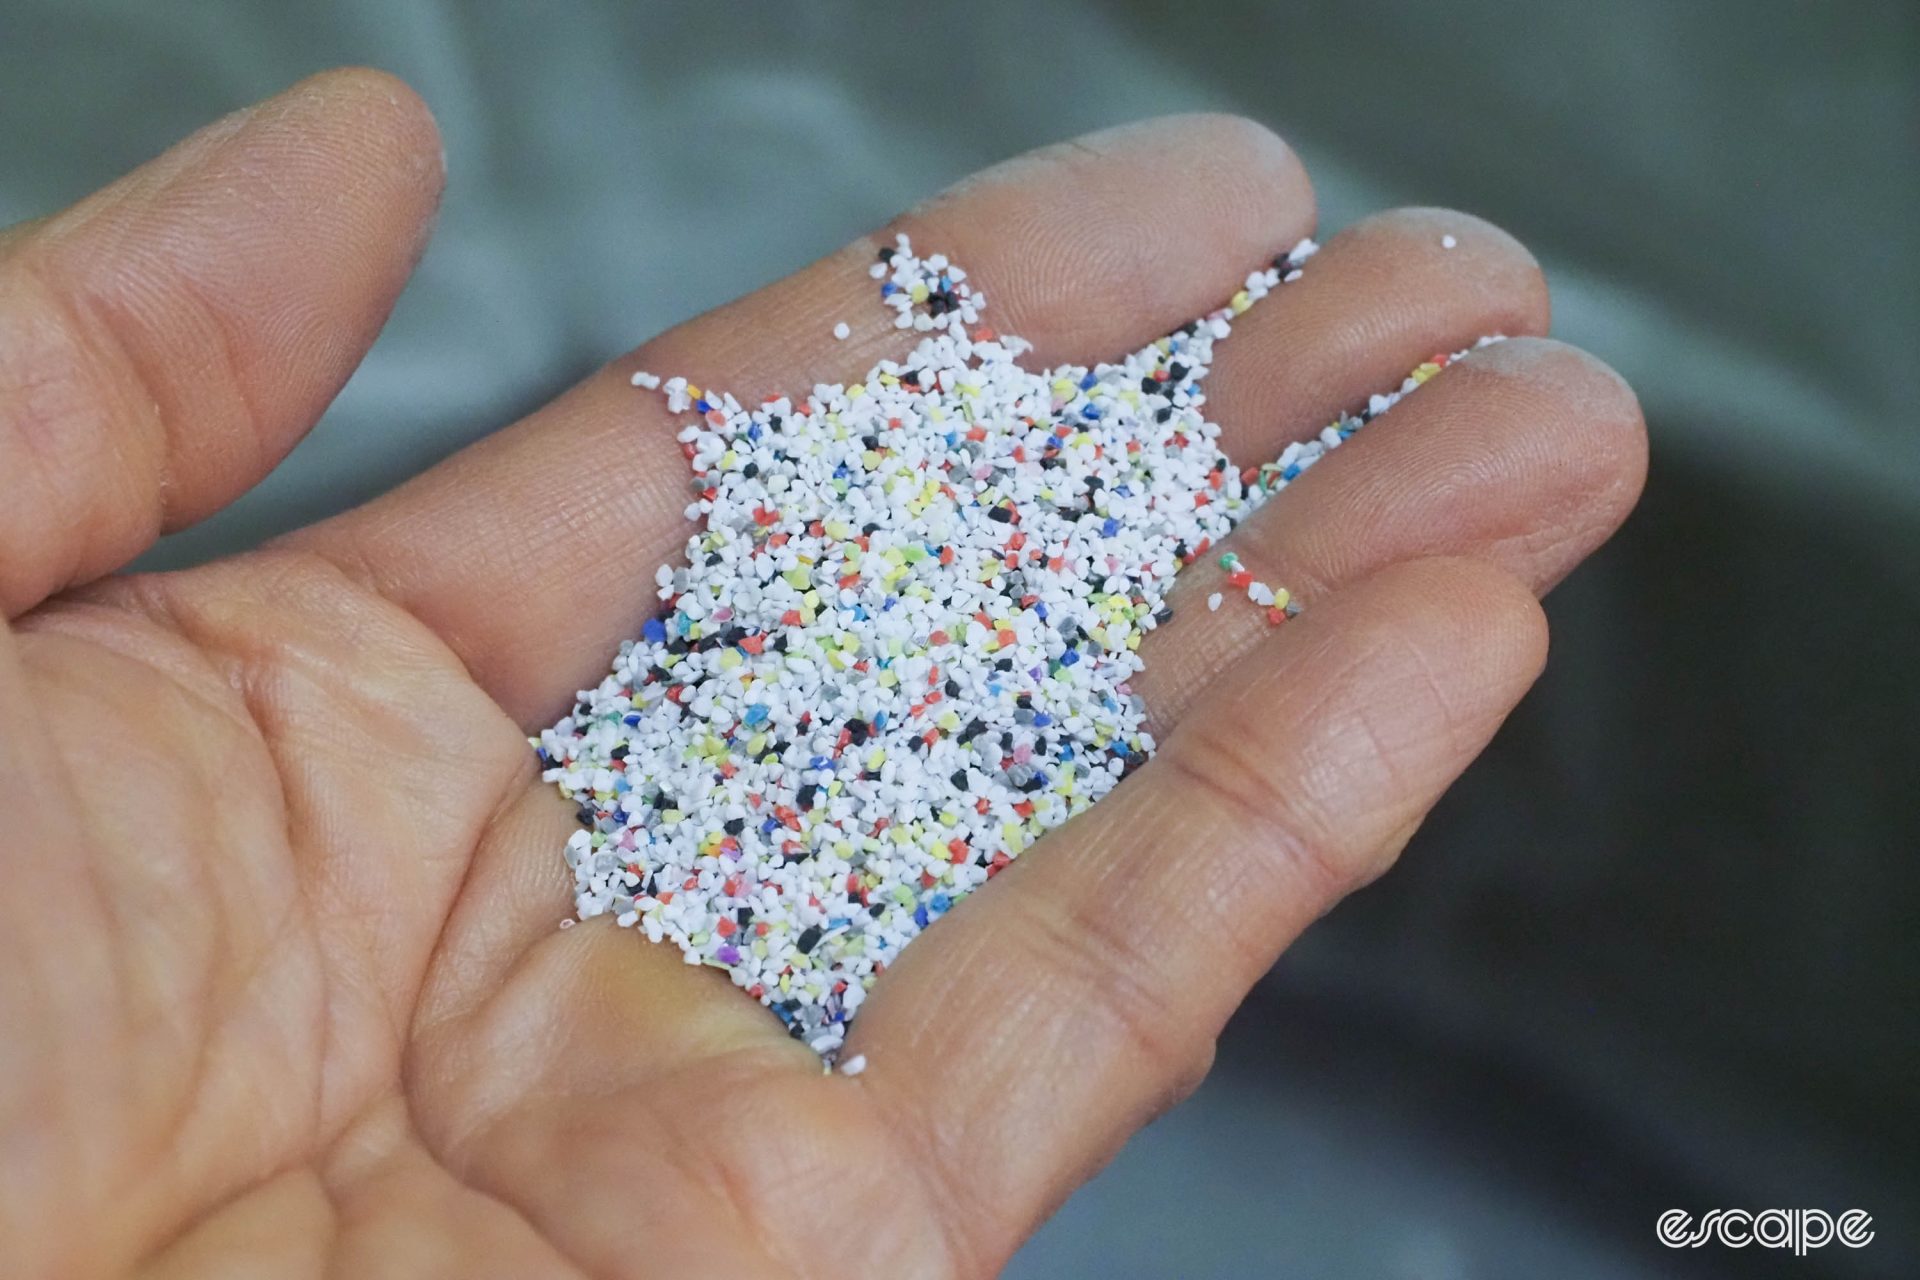 A pile of tiny plastic beads for blasting shown held in someone's hand.